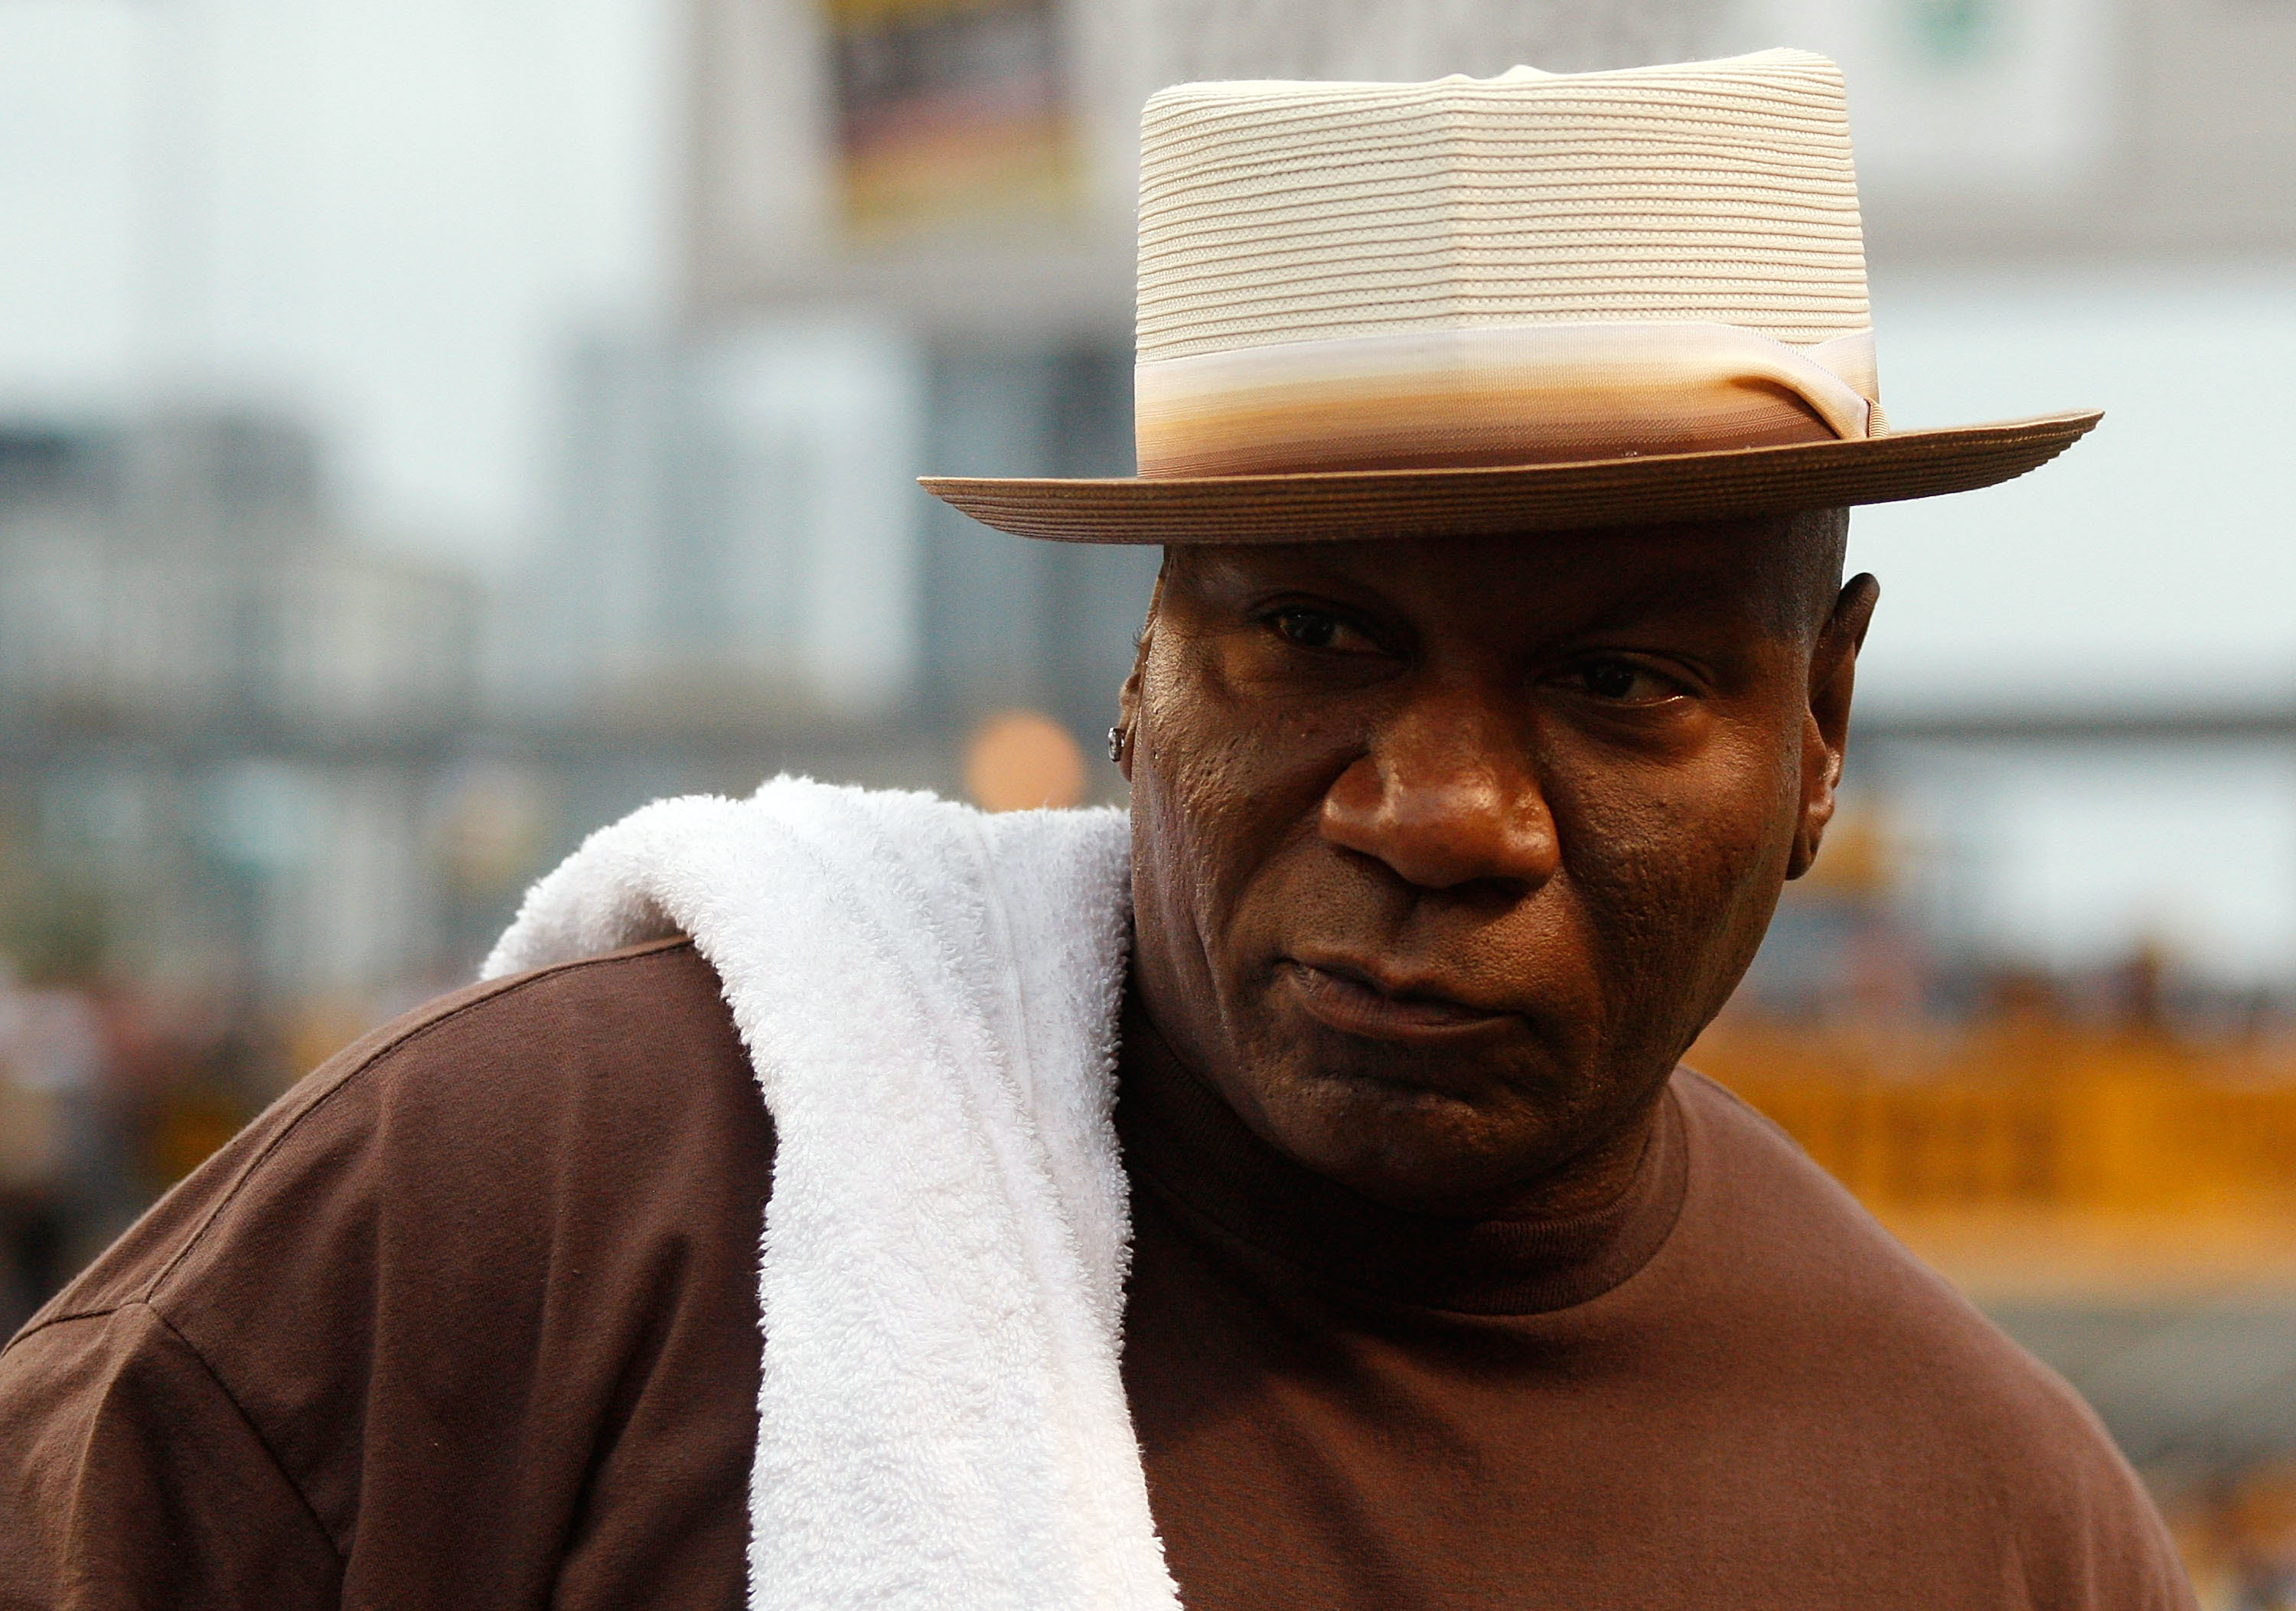 Actor Ving Rhames watches players warm up on the sideline before the preseason game between the Pittsburgh Steelers and the Detroit Lions on August 14, 2010 at Heinz Field in Pittsburgh, Pennsylvania.  (Photo by Jared Wickerham/Getty Images)